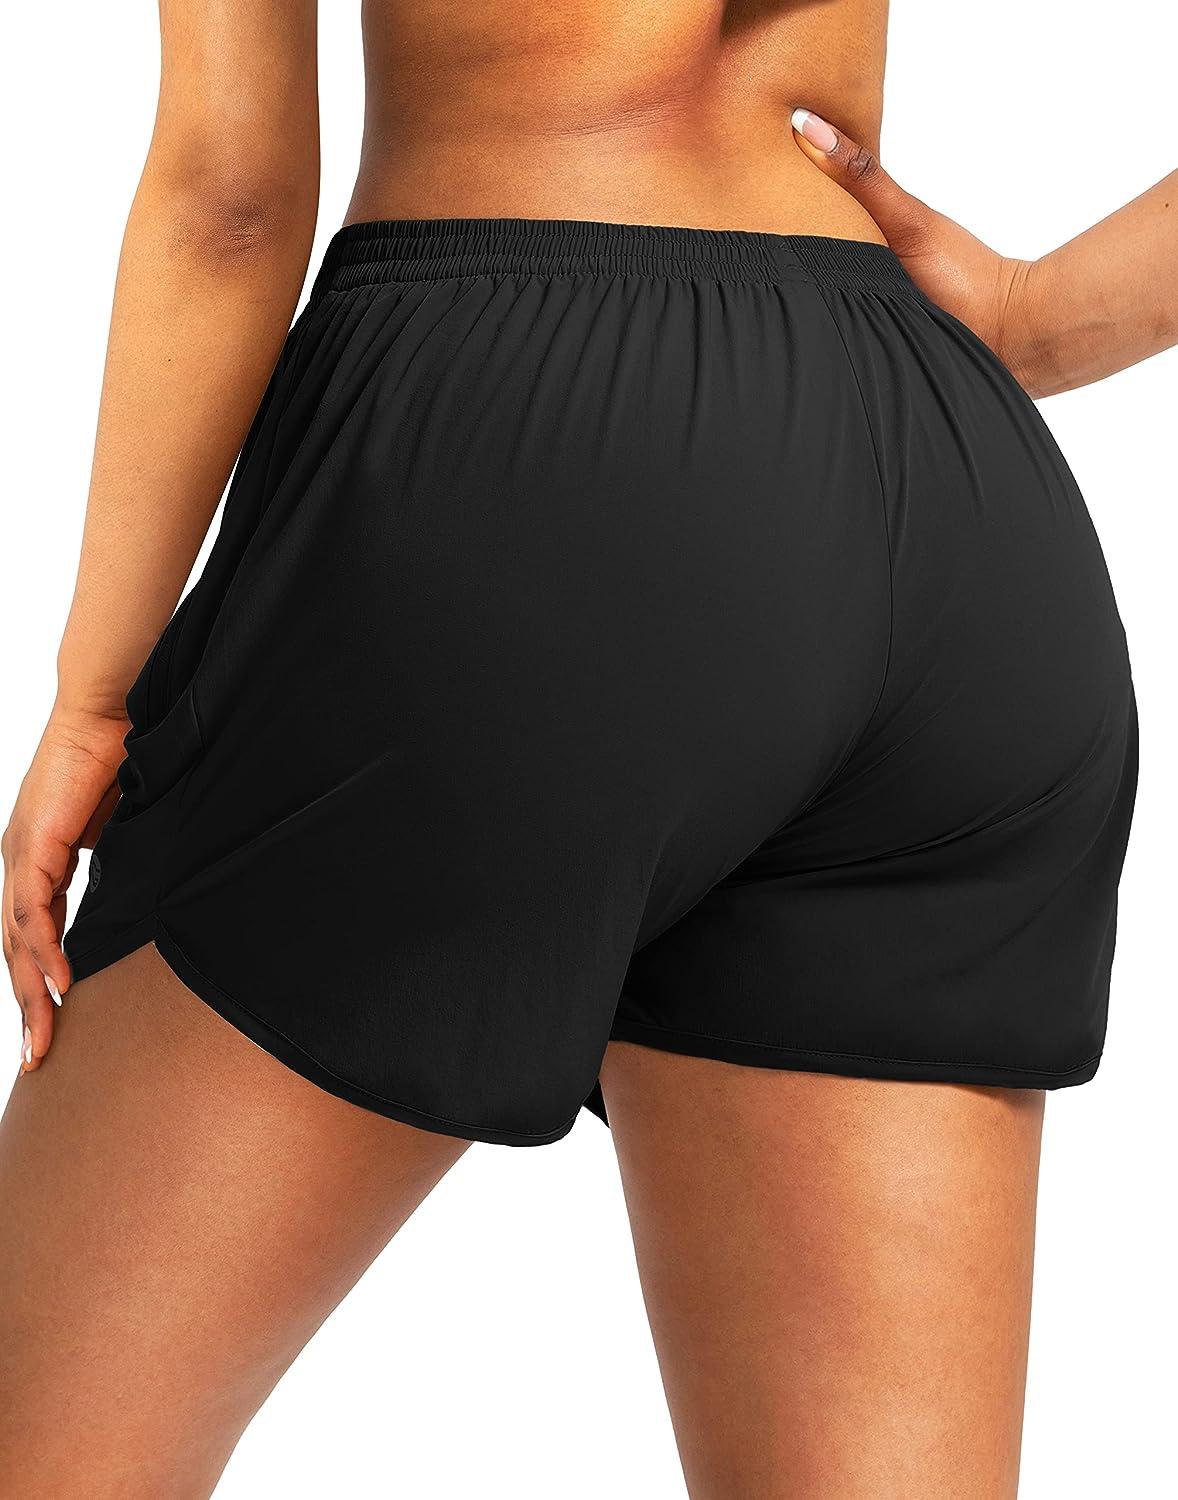 Buy NOMINATE Womens 3 Inches Running Shorts with Liner Lightweight Athletic  Quick Dry Shorts for Women with Zipper Pockets at